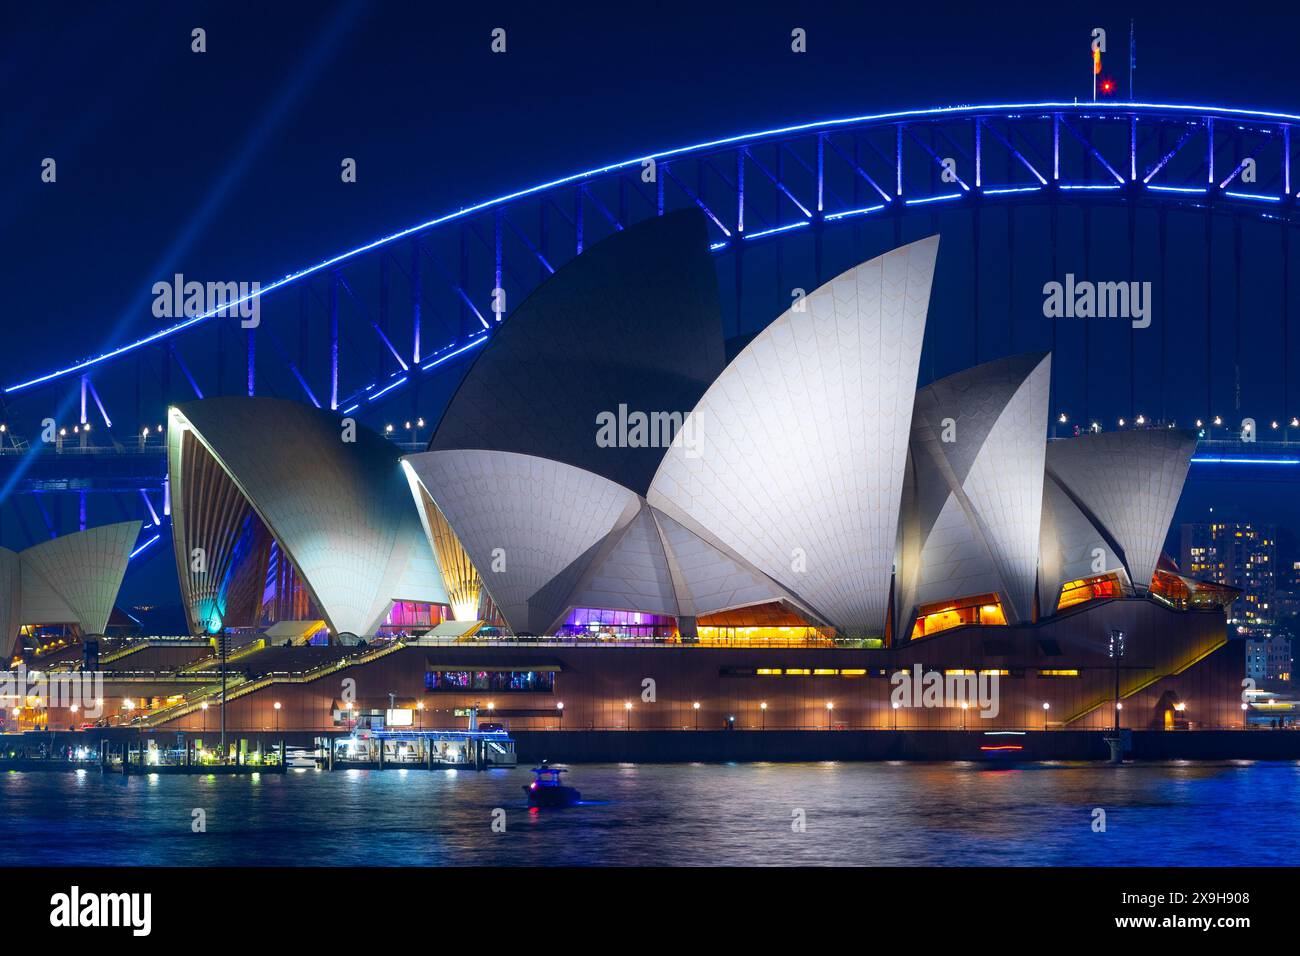 A night view of Sydney Opera House and Sydney Harbour Bridge in Sydney, New South Wales, Australia. Stock Photo